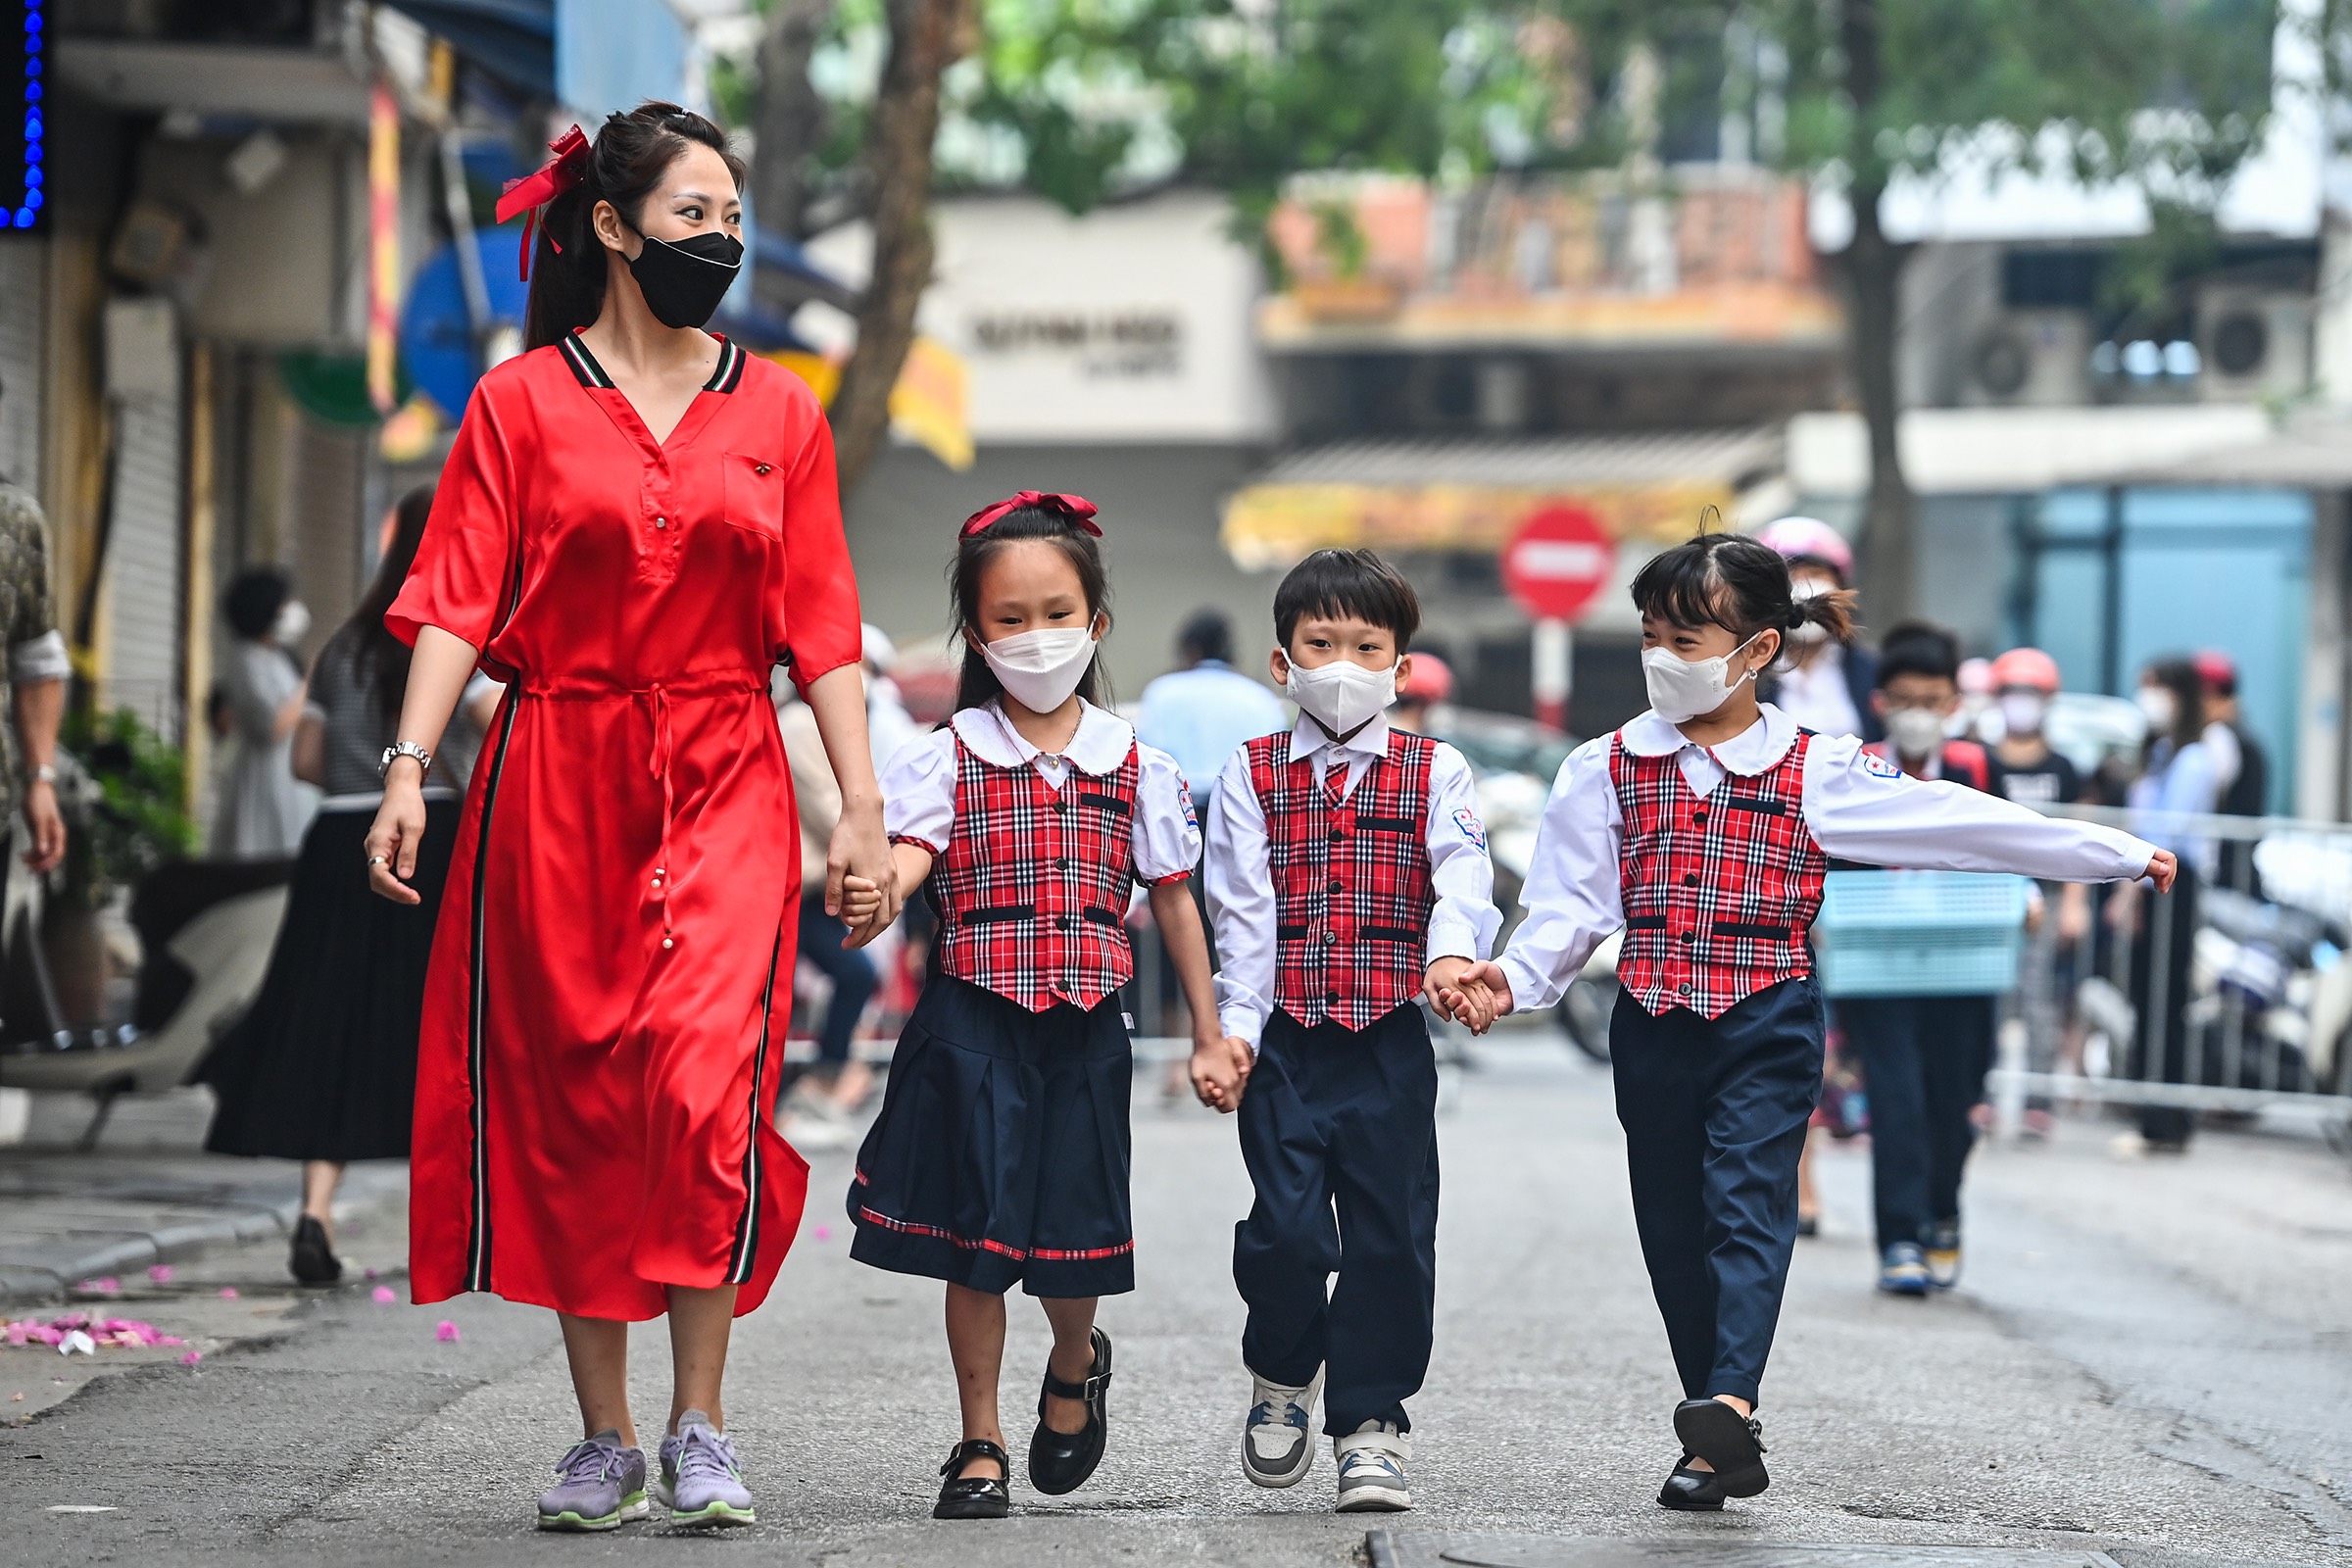 A woman takes three primary grade kids to school in Hanoi, April 6, 2022. Photo by VnExpress/Giang Huy